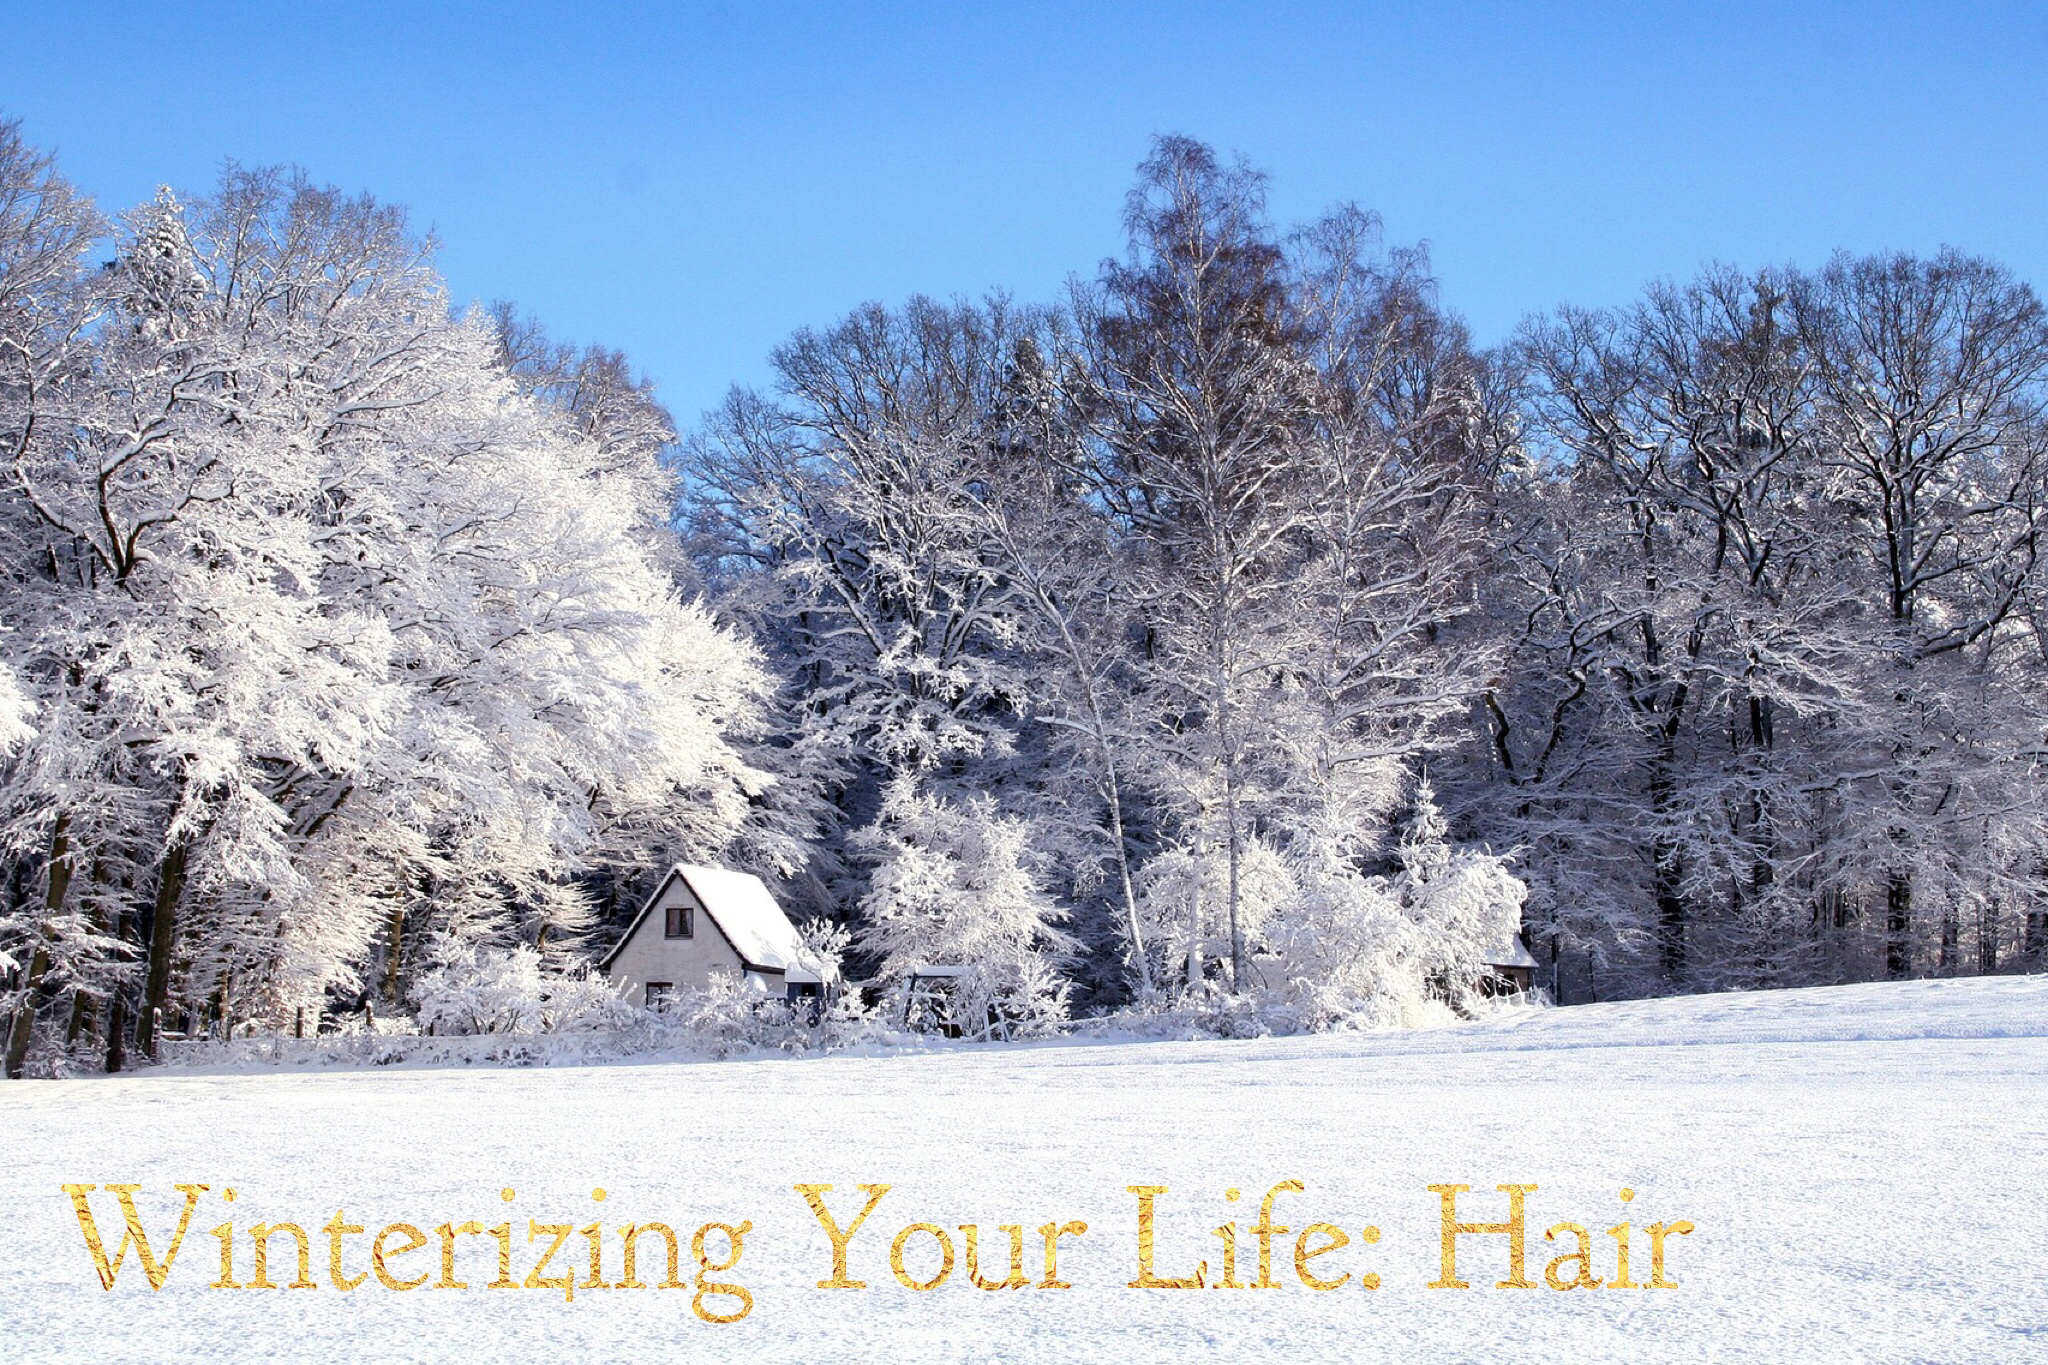 Image of snowy background with Winterizing Your Life Hair in text